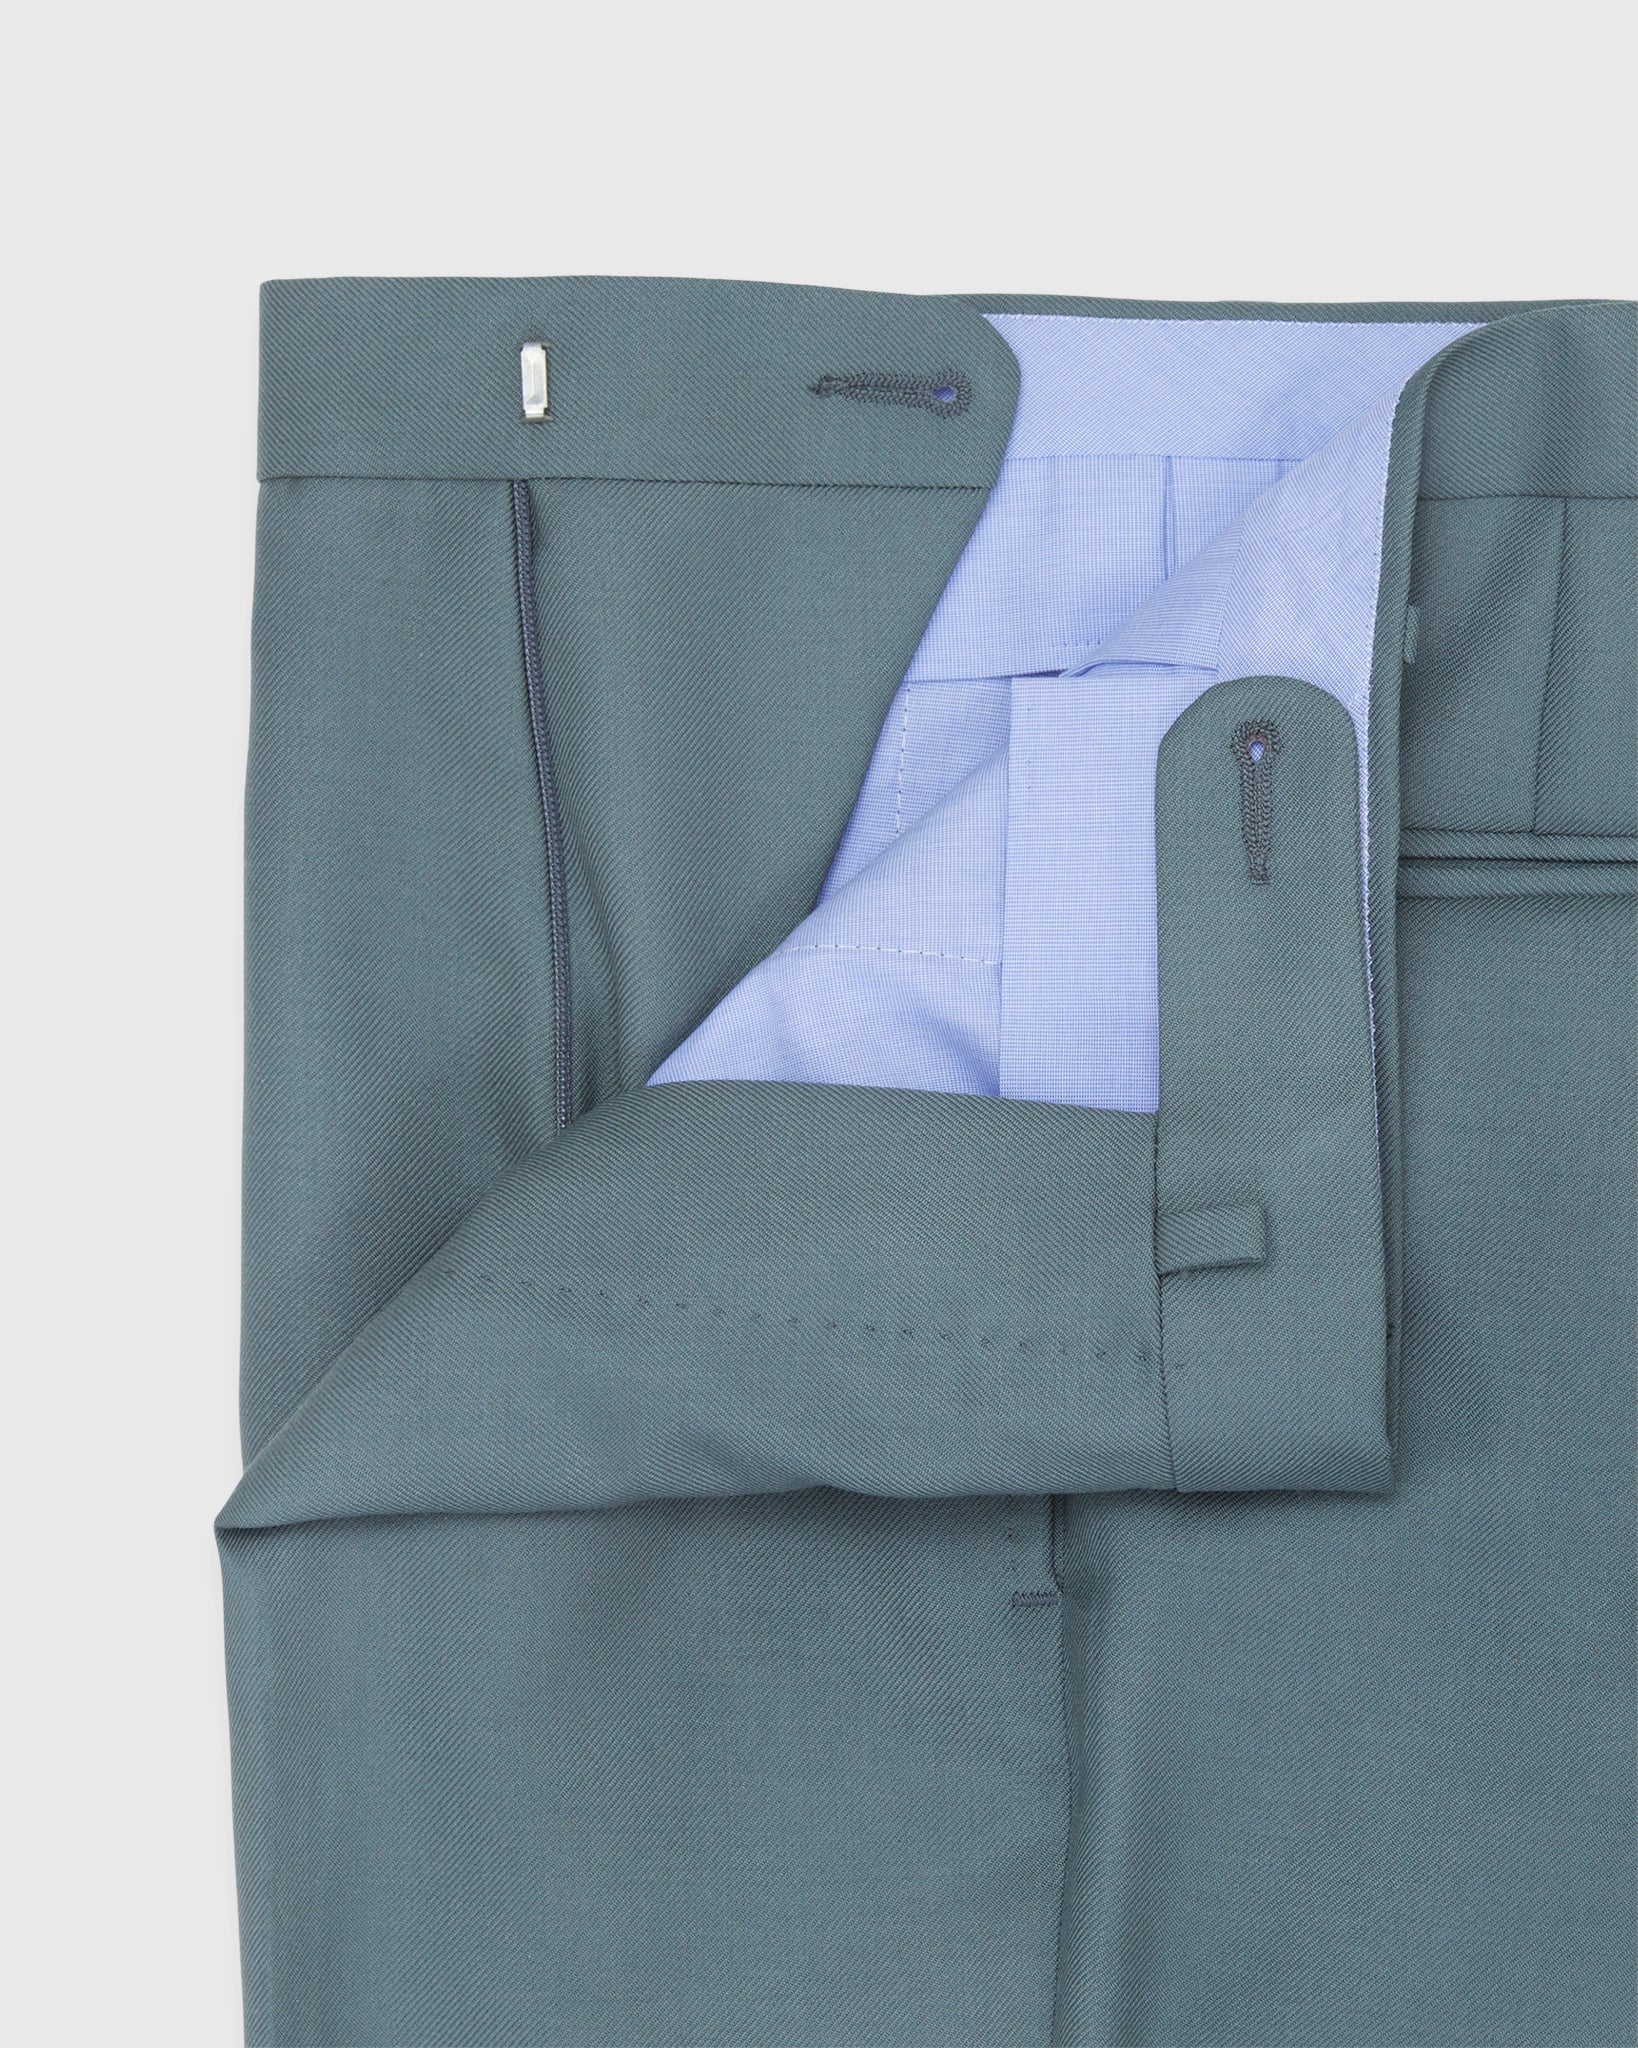 Dress Trouser in Sage Midweight Twill